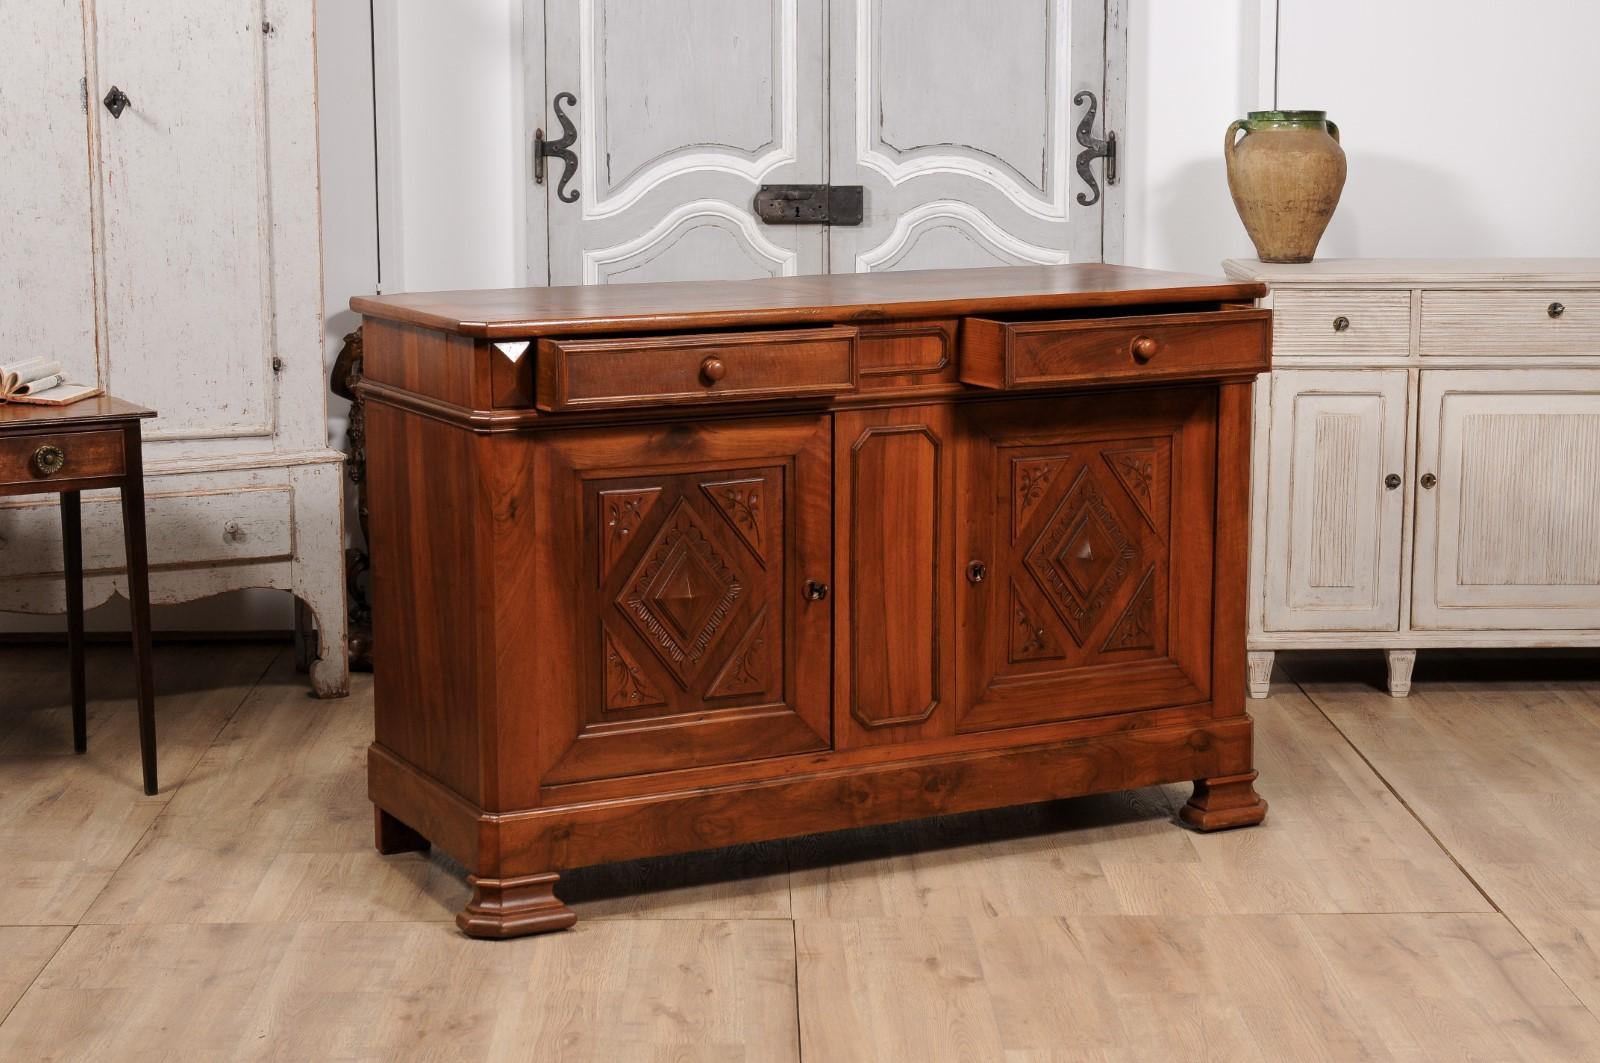 Italian 19th Century Walnut Buffet with Carved Diamond and Floral Motifs For Sale 1